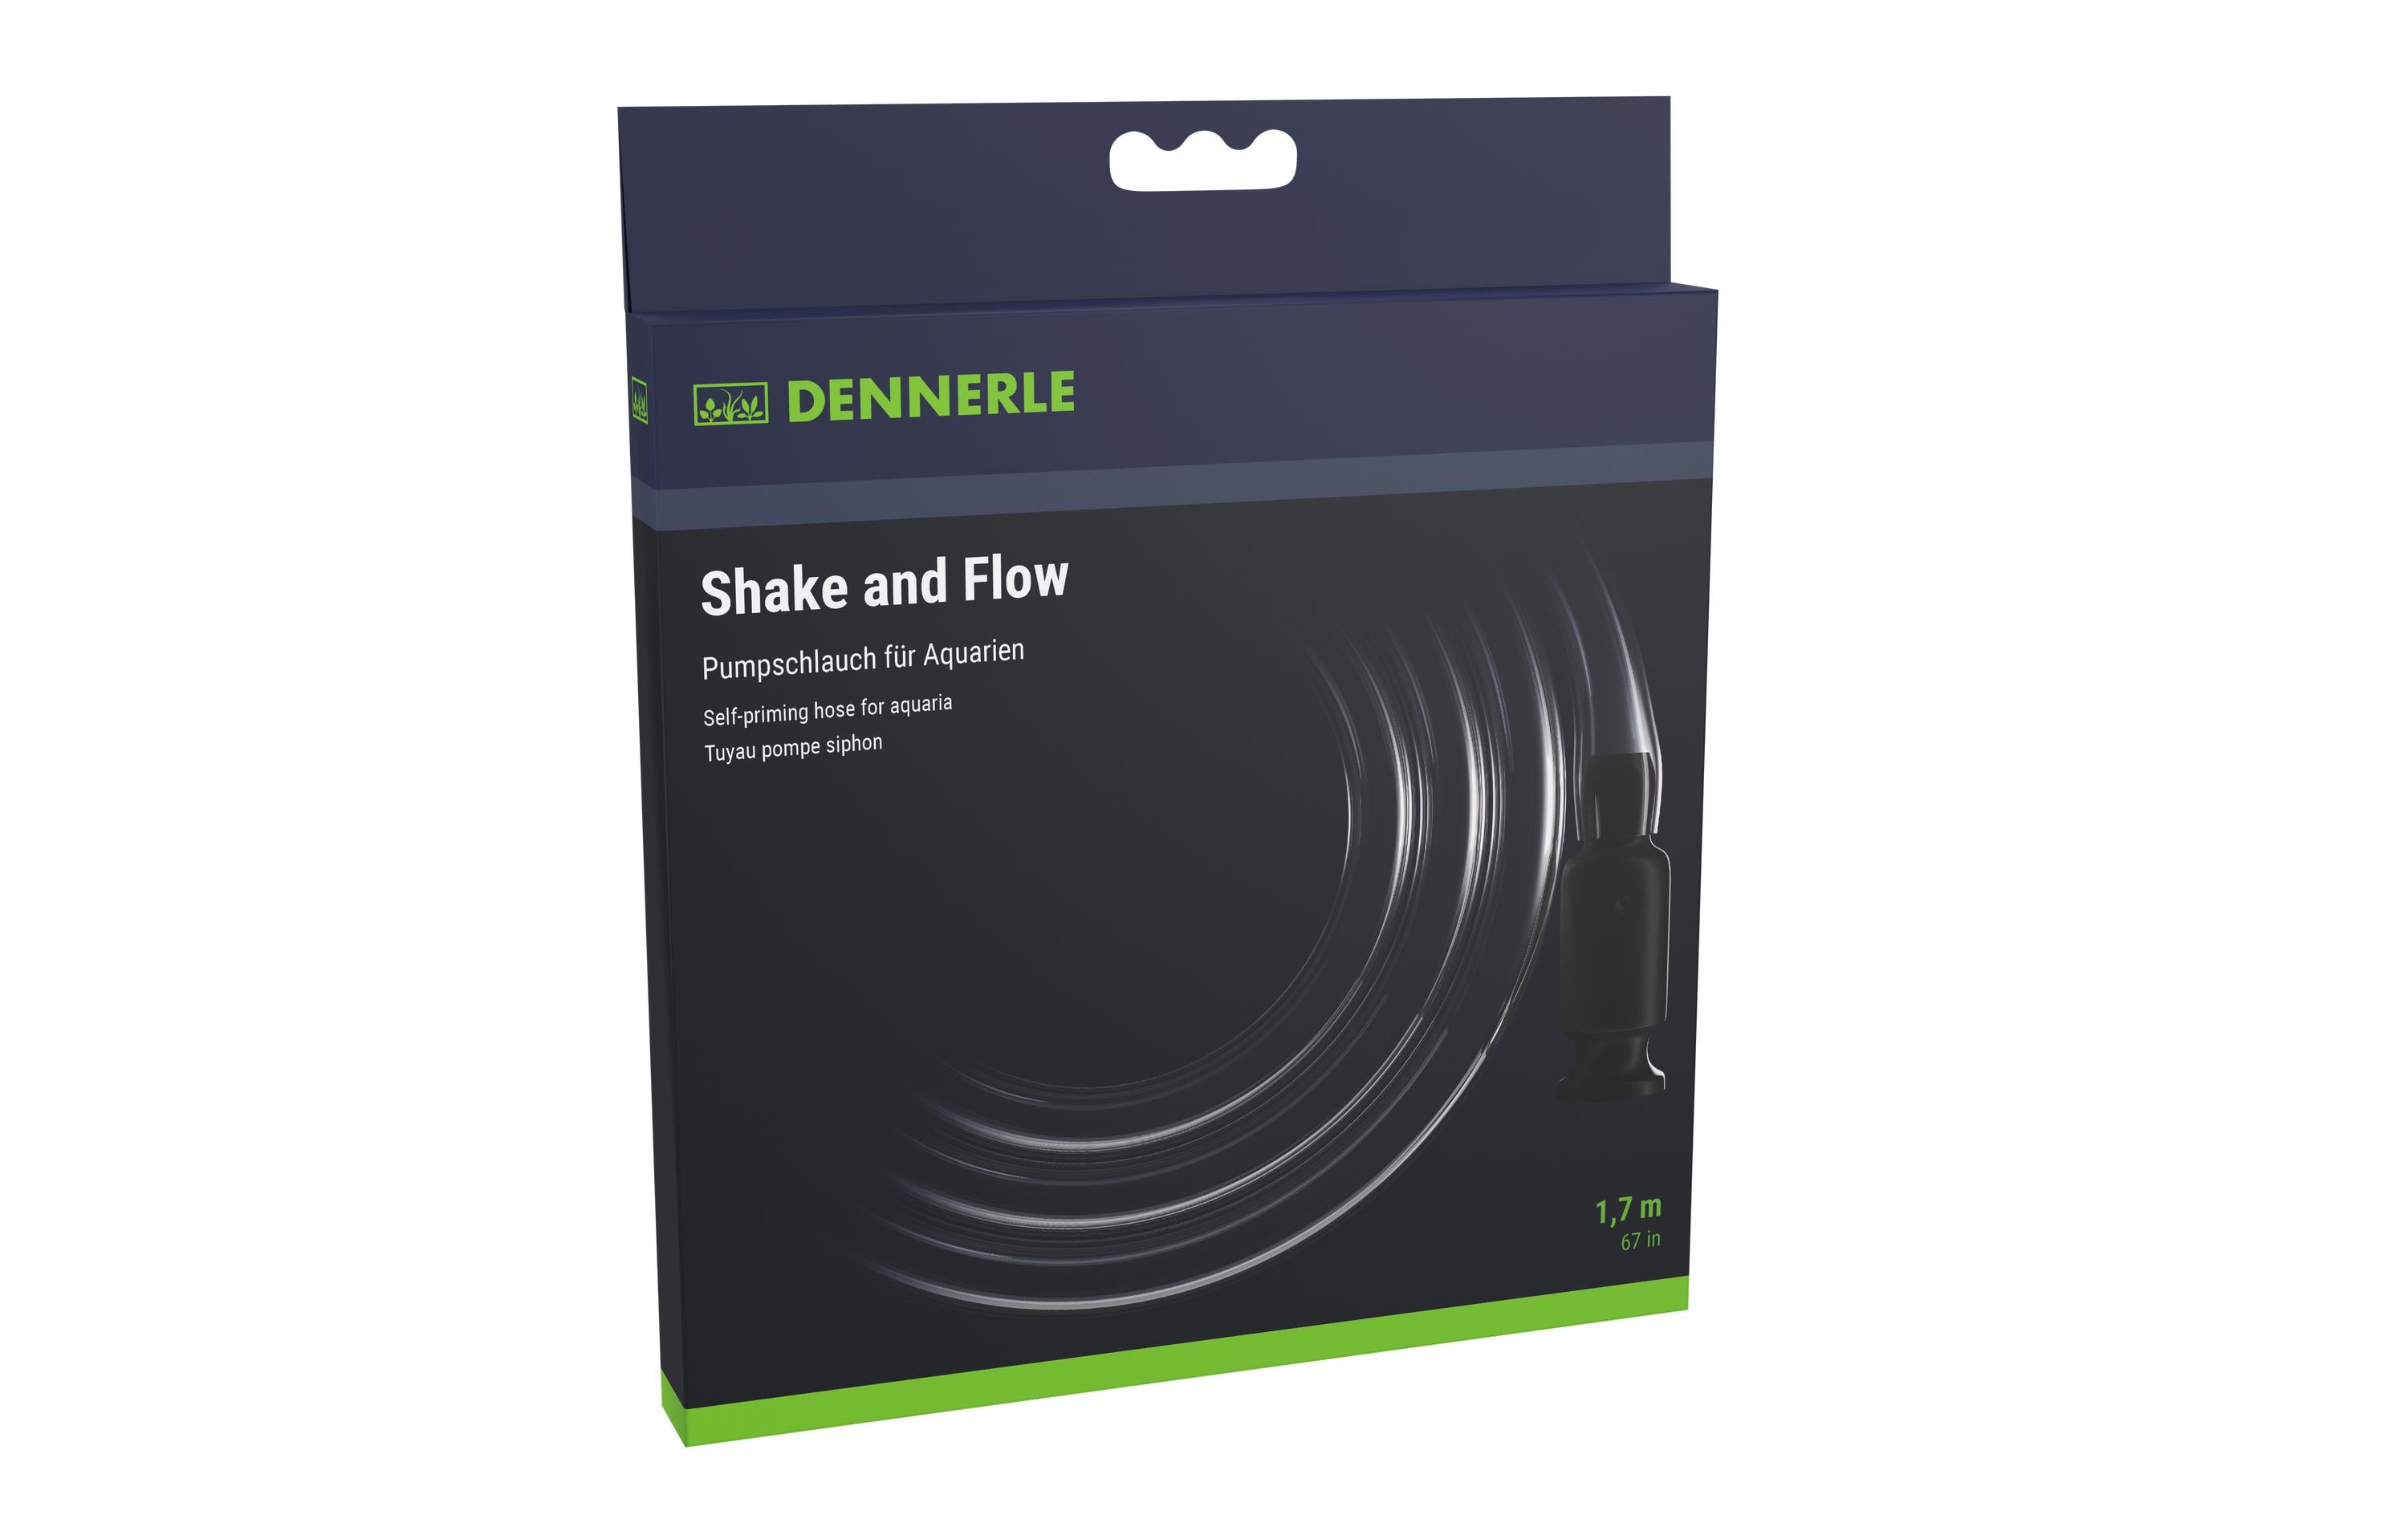 Dennerle Shake and Flow